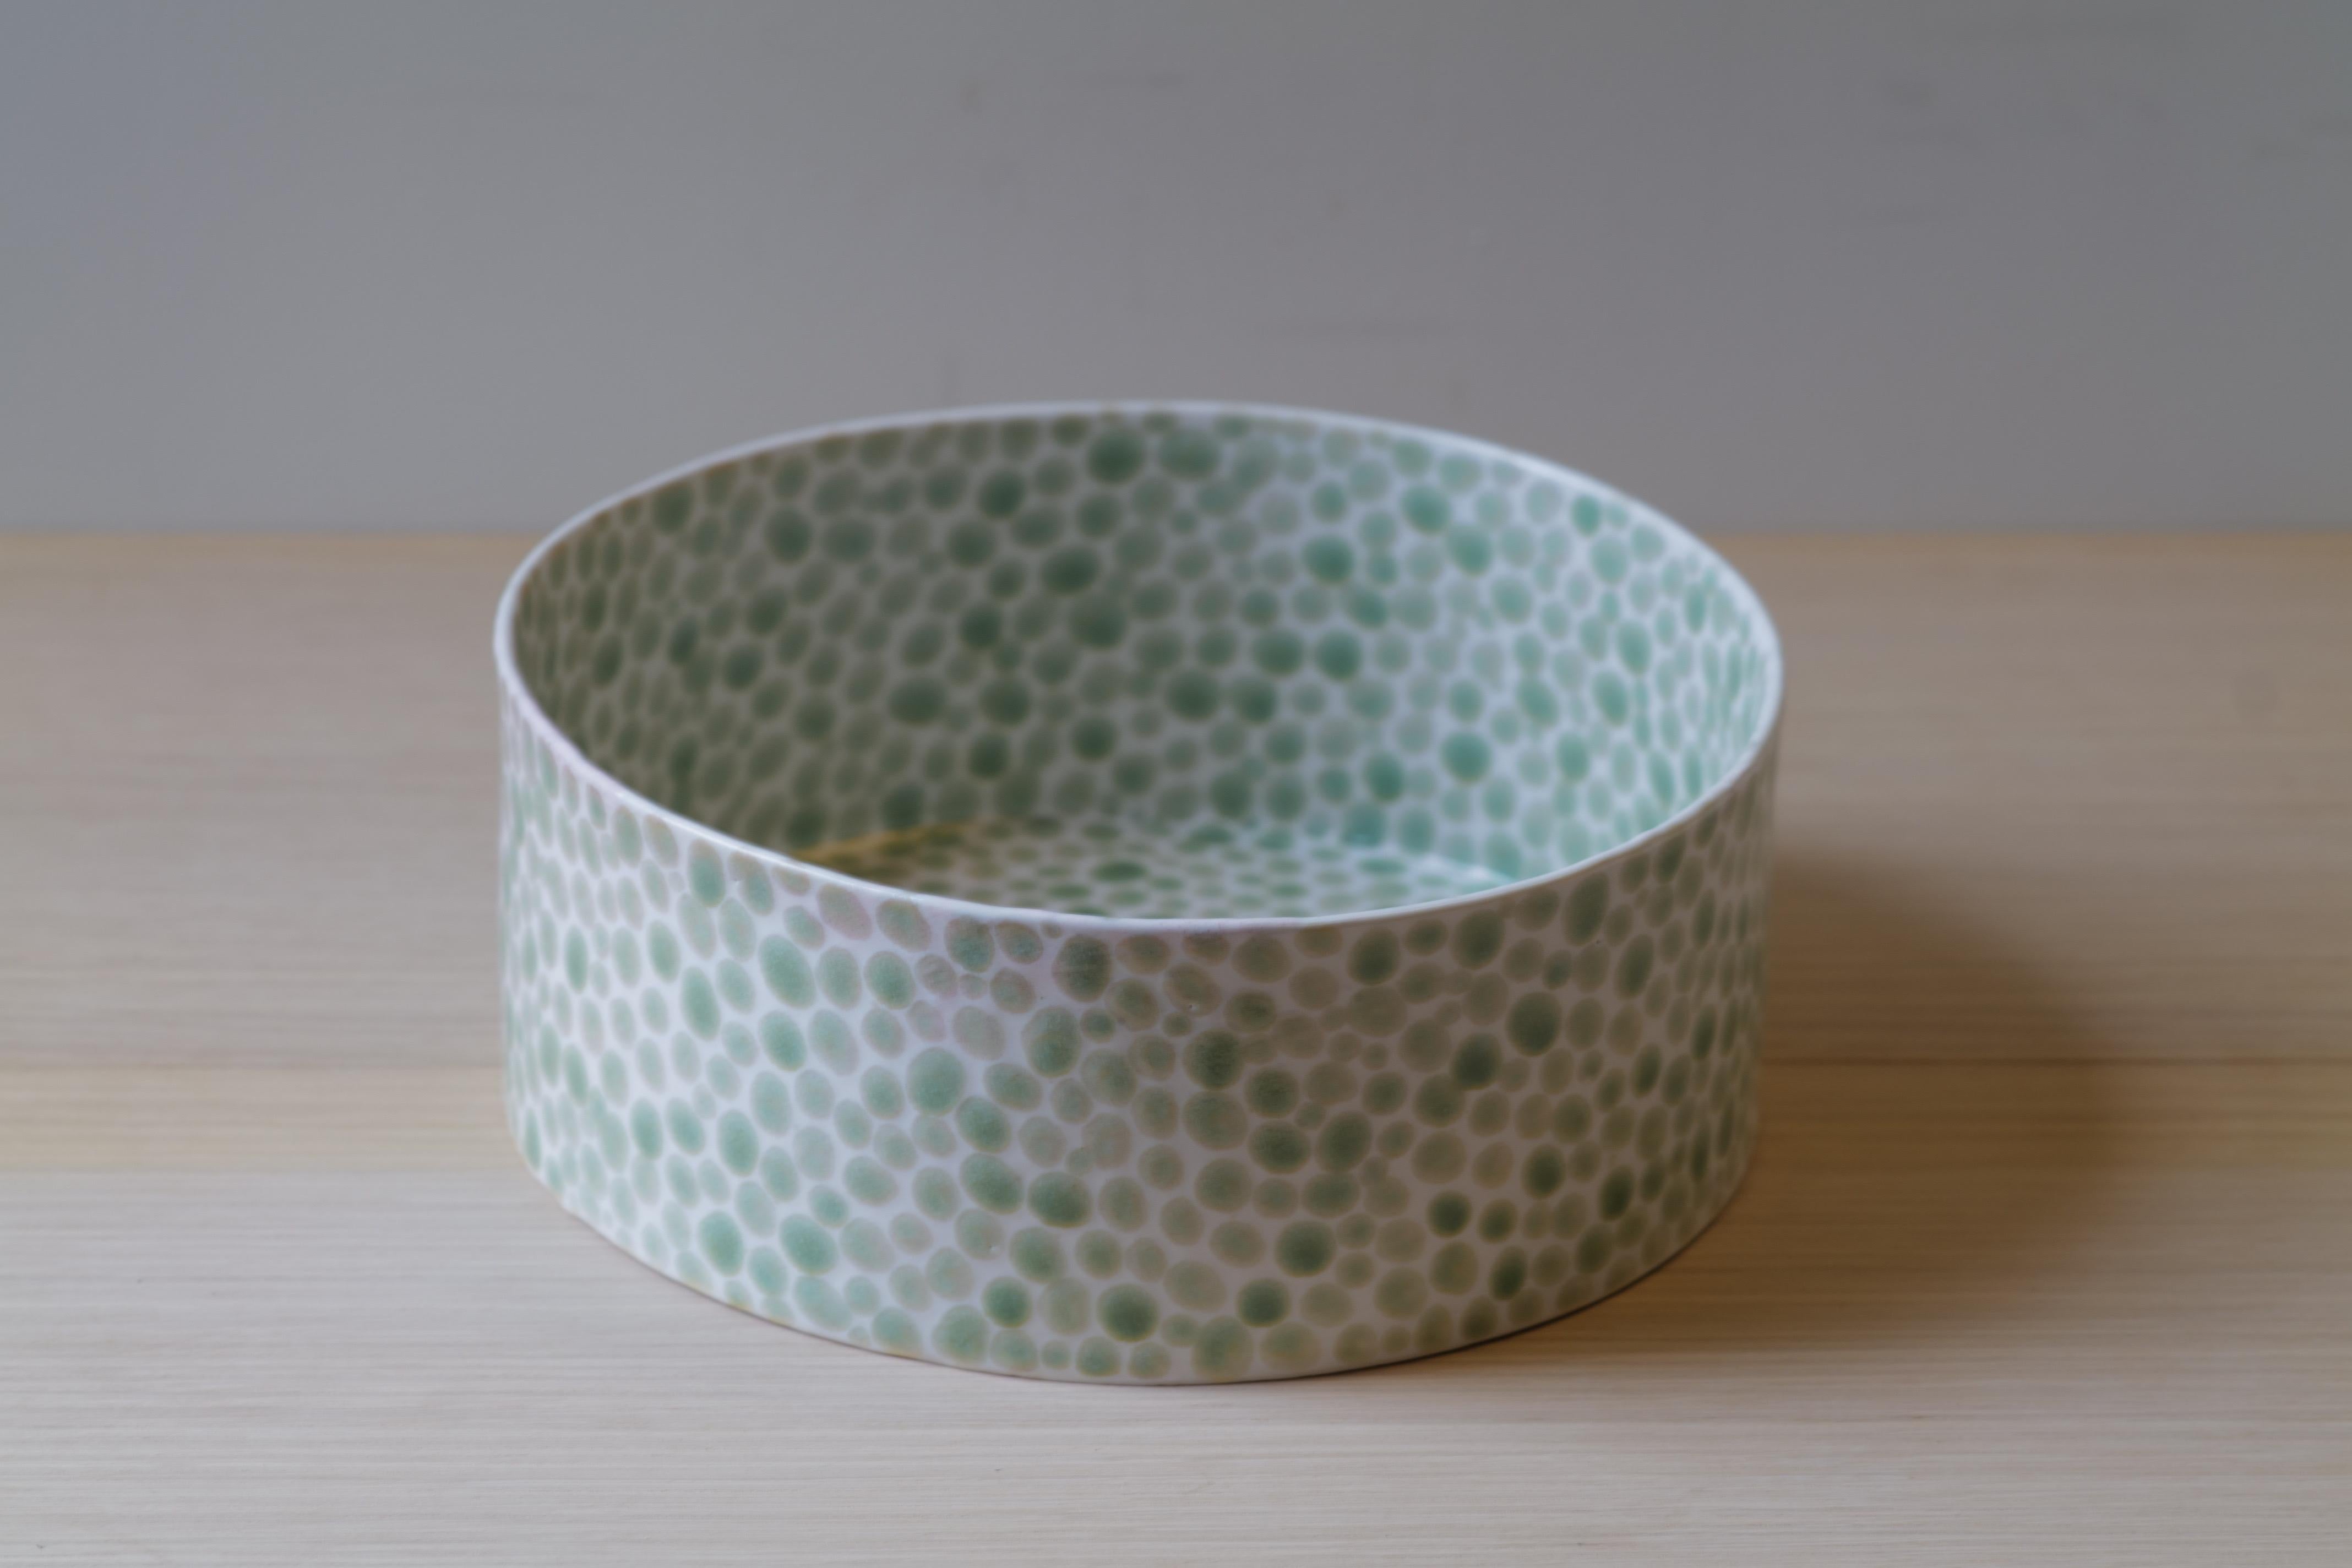 This porcelain large bowl was made in NYC by artist Lana Kova. It is slip casted in mold and then fired , hand painted and fired again. It is very precise in its painting of dot pattern and thin for its size. This piece makes a beautiful addition to